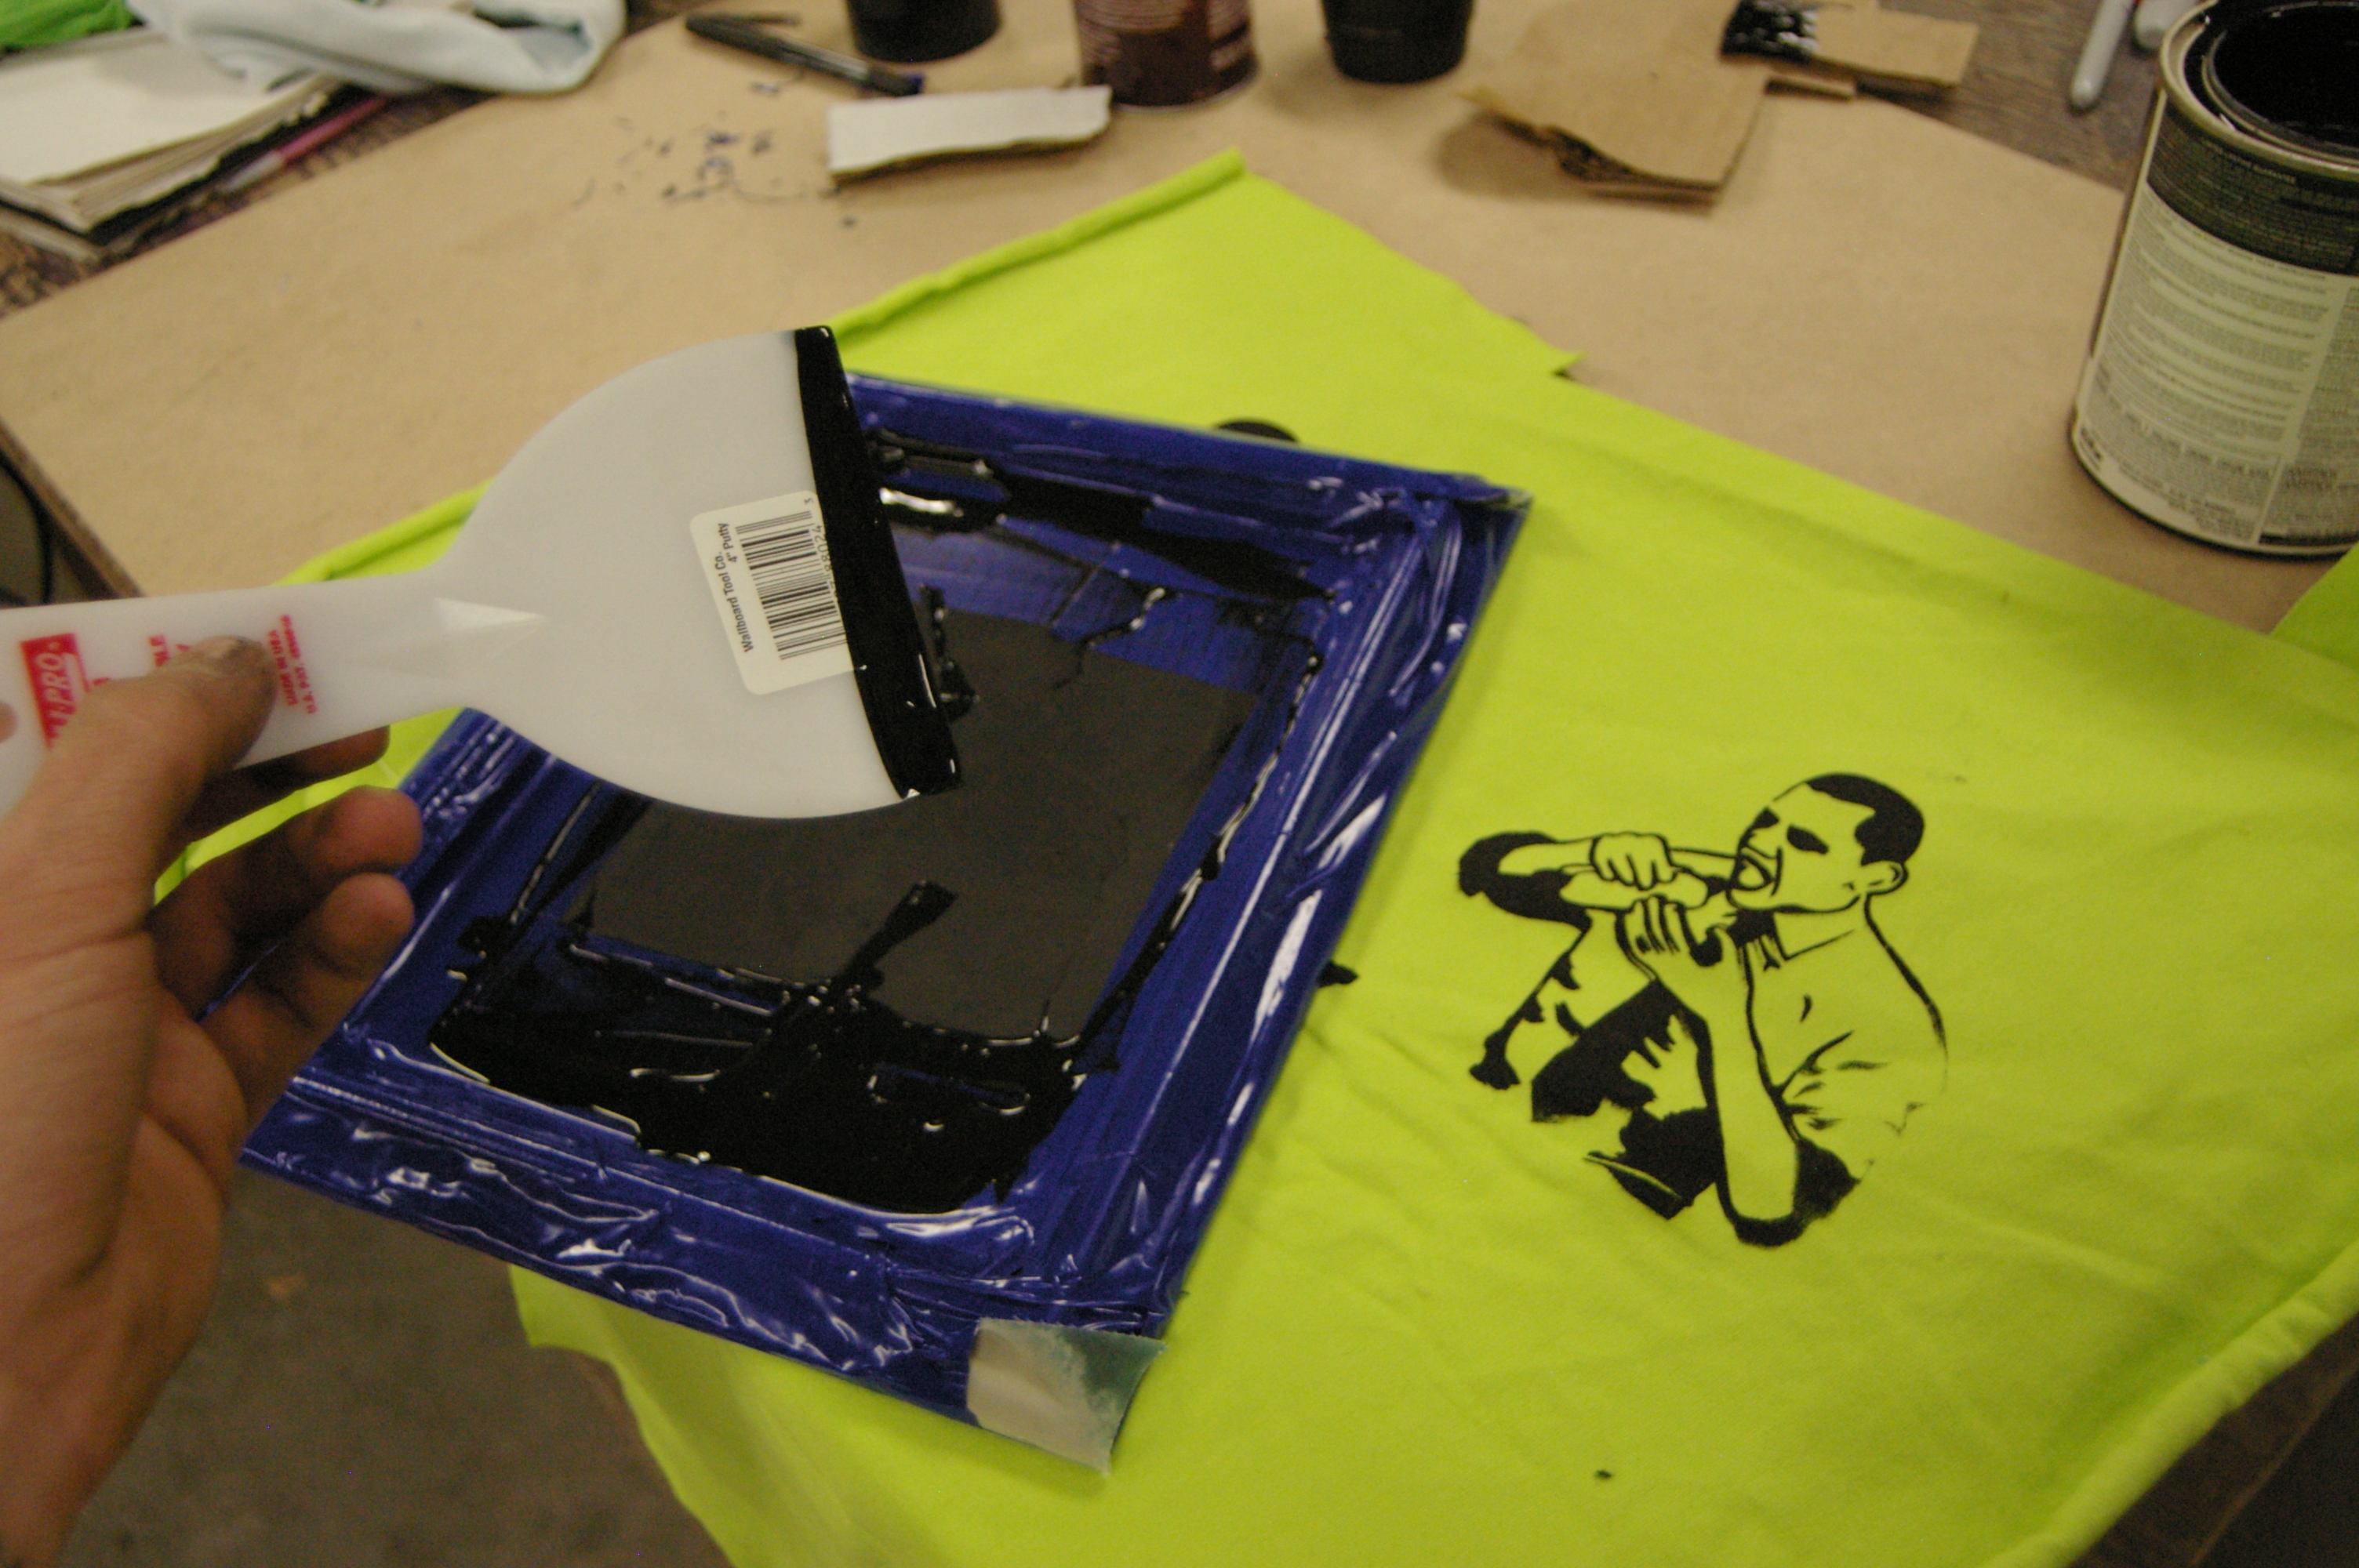 down and dirty screenprinting for under 10$